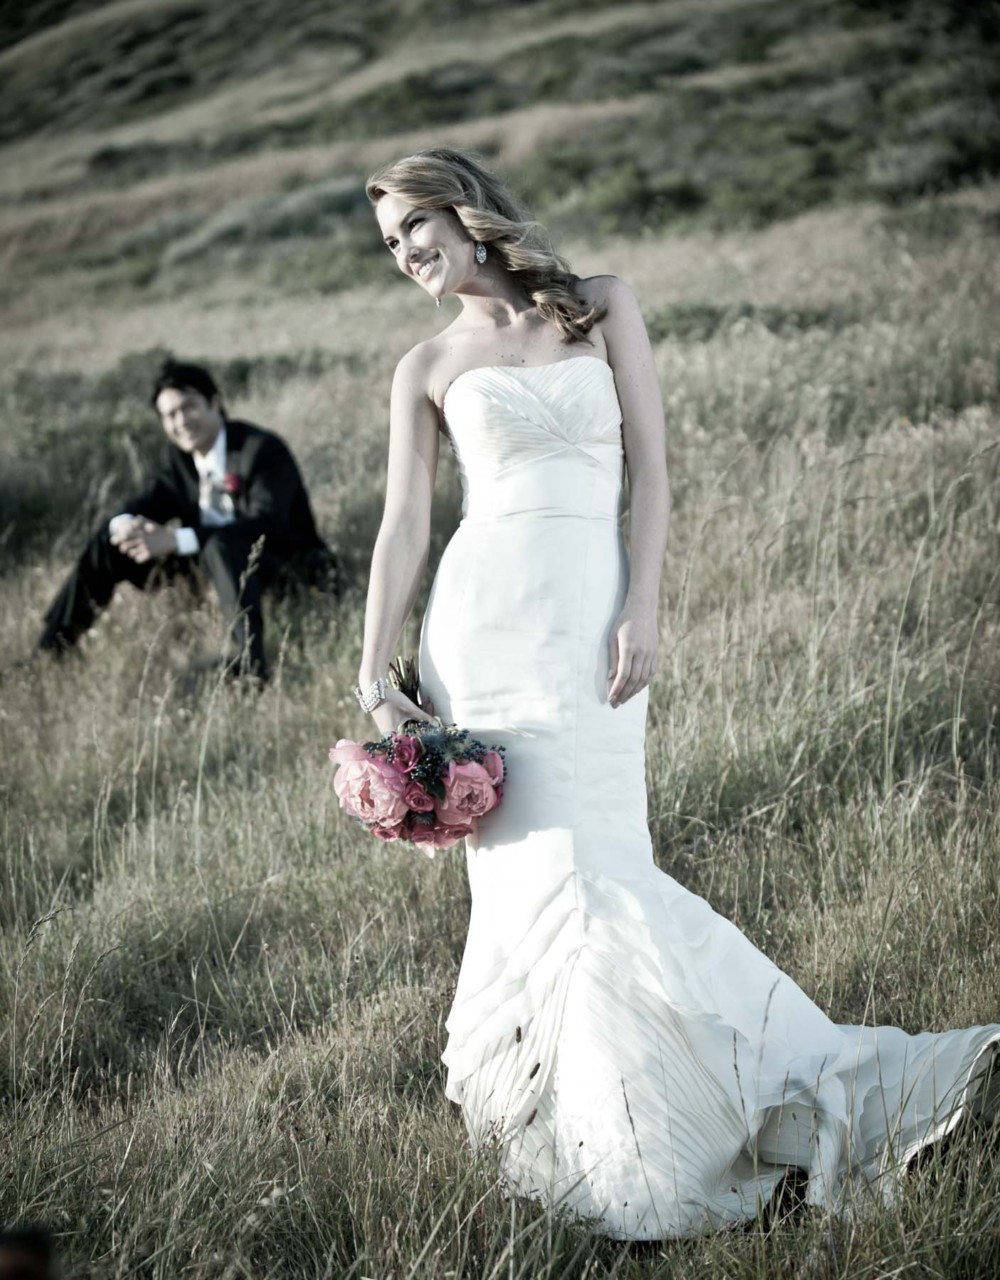 Looking for a creative wedding photographer in Eagle River?